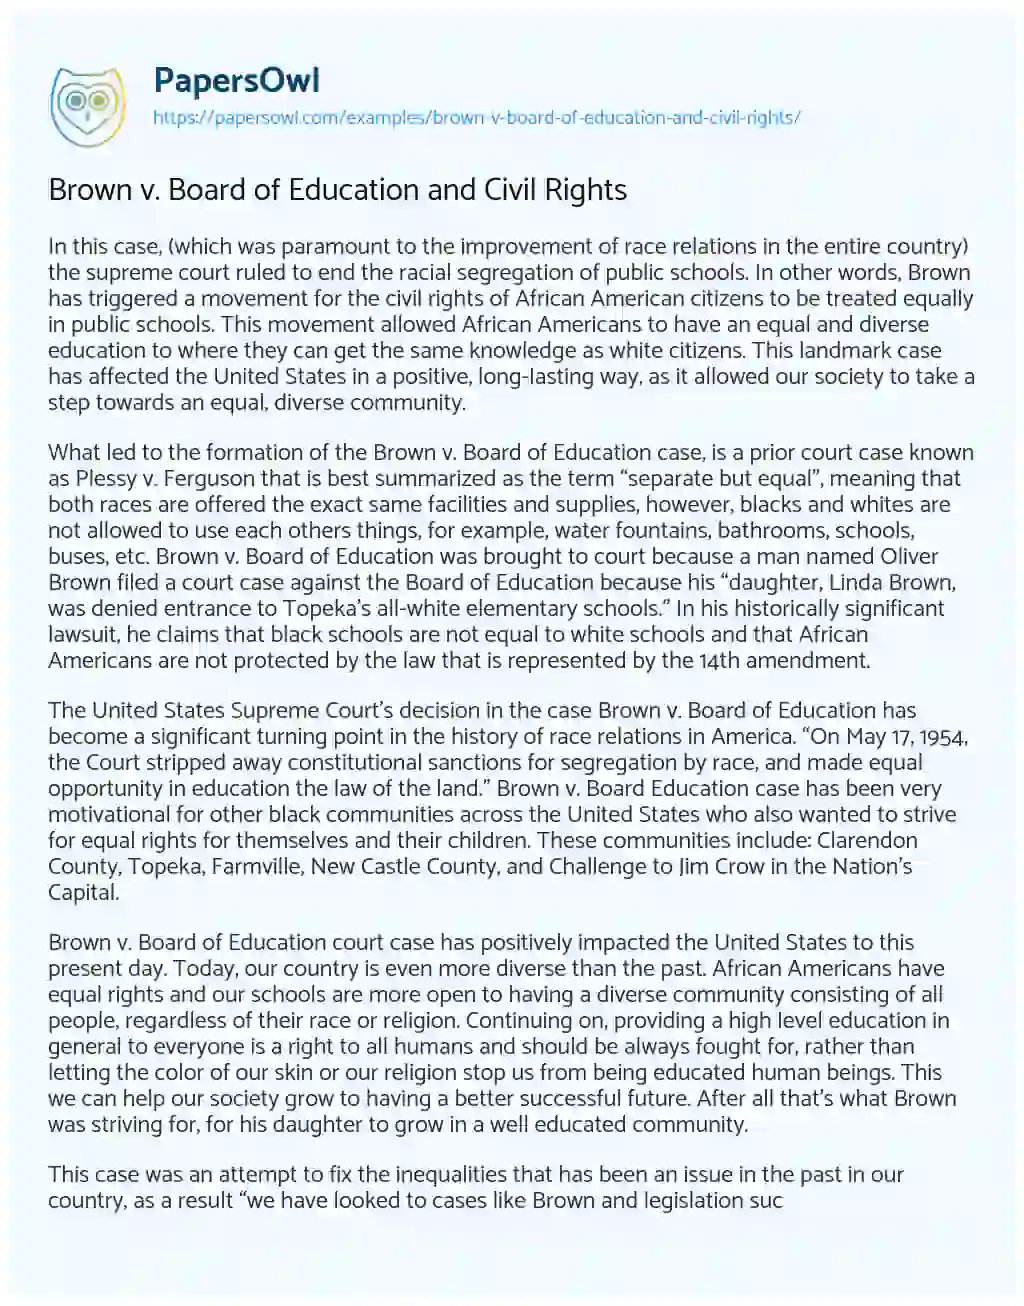 Brown V. Board of Education and Civil Rights essay